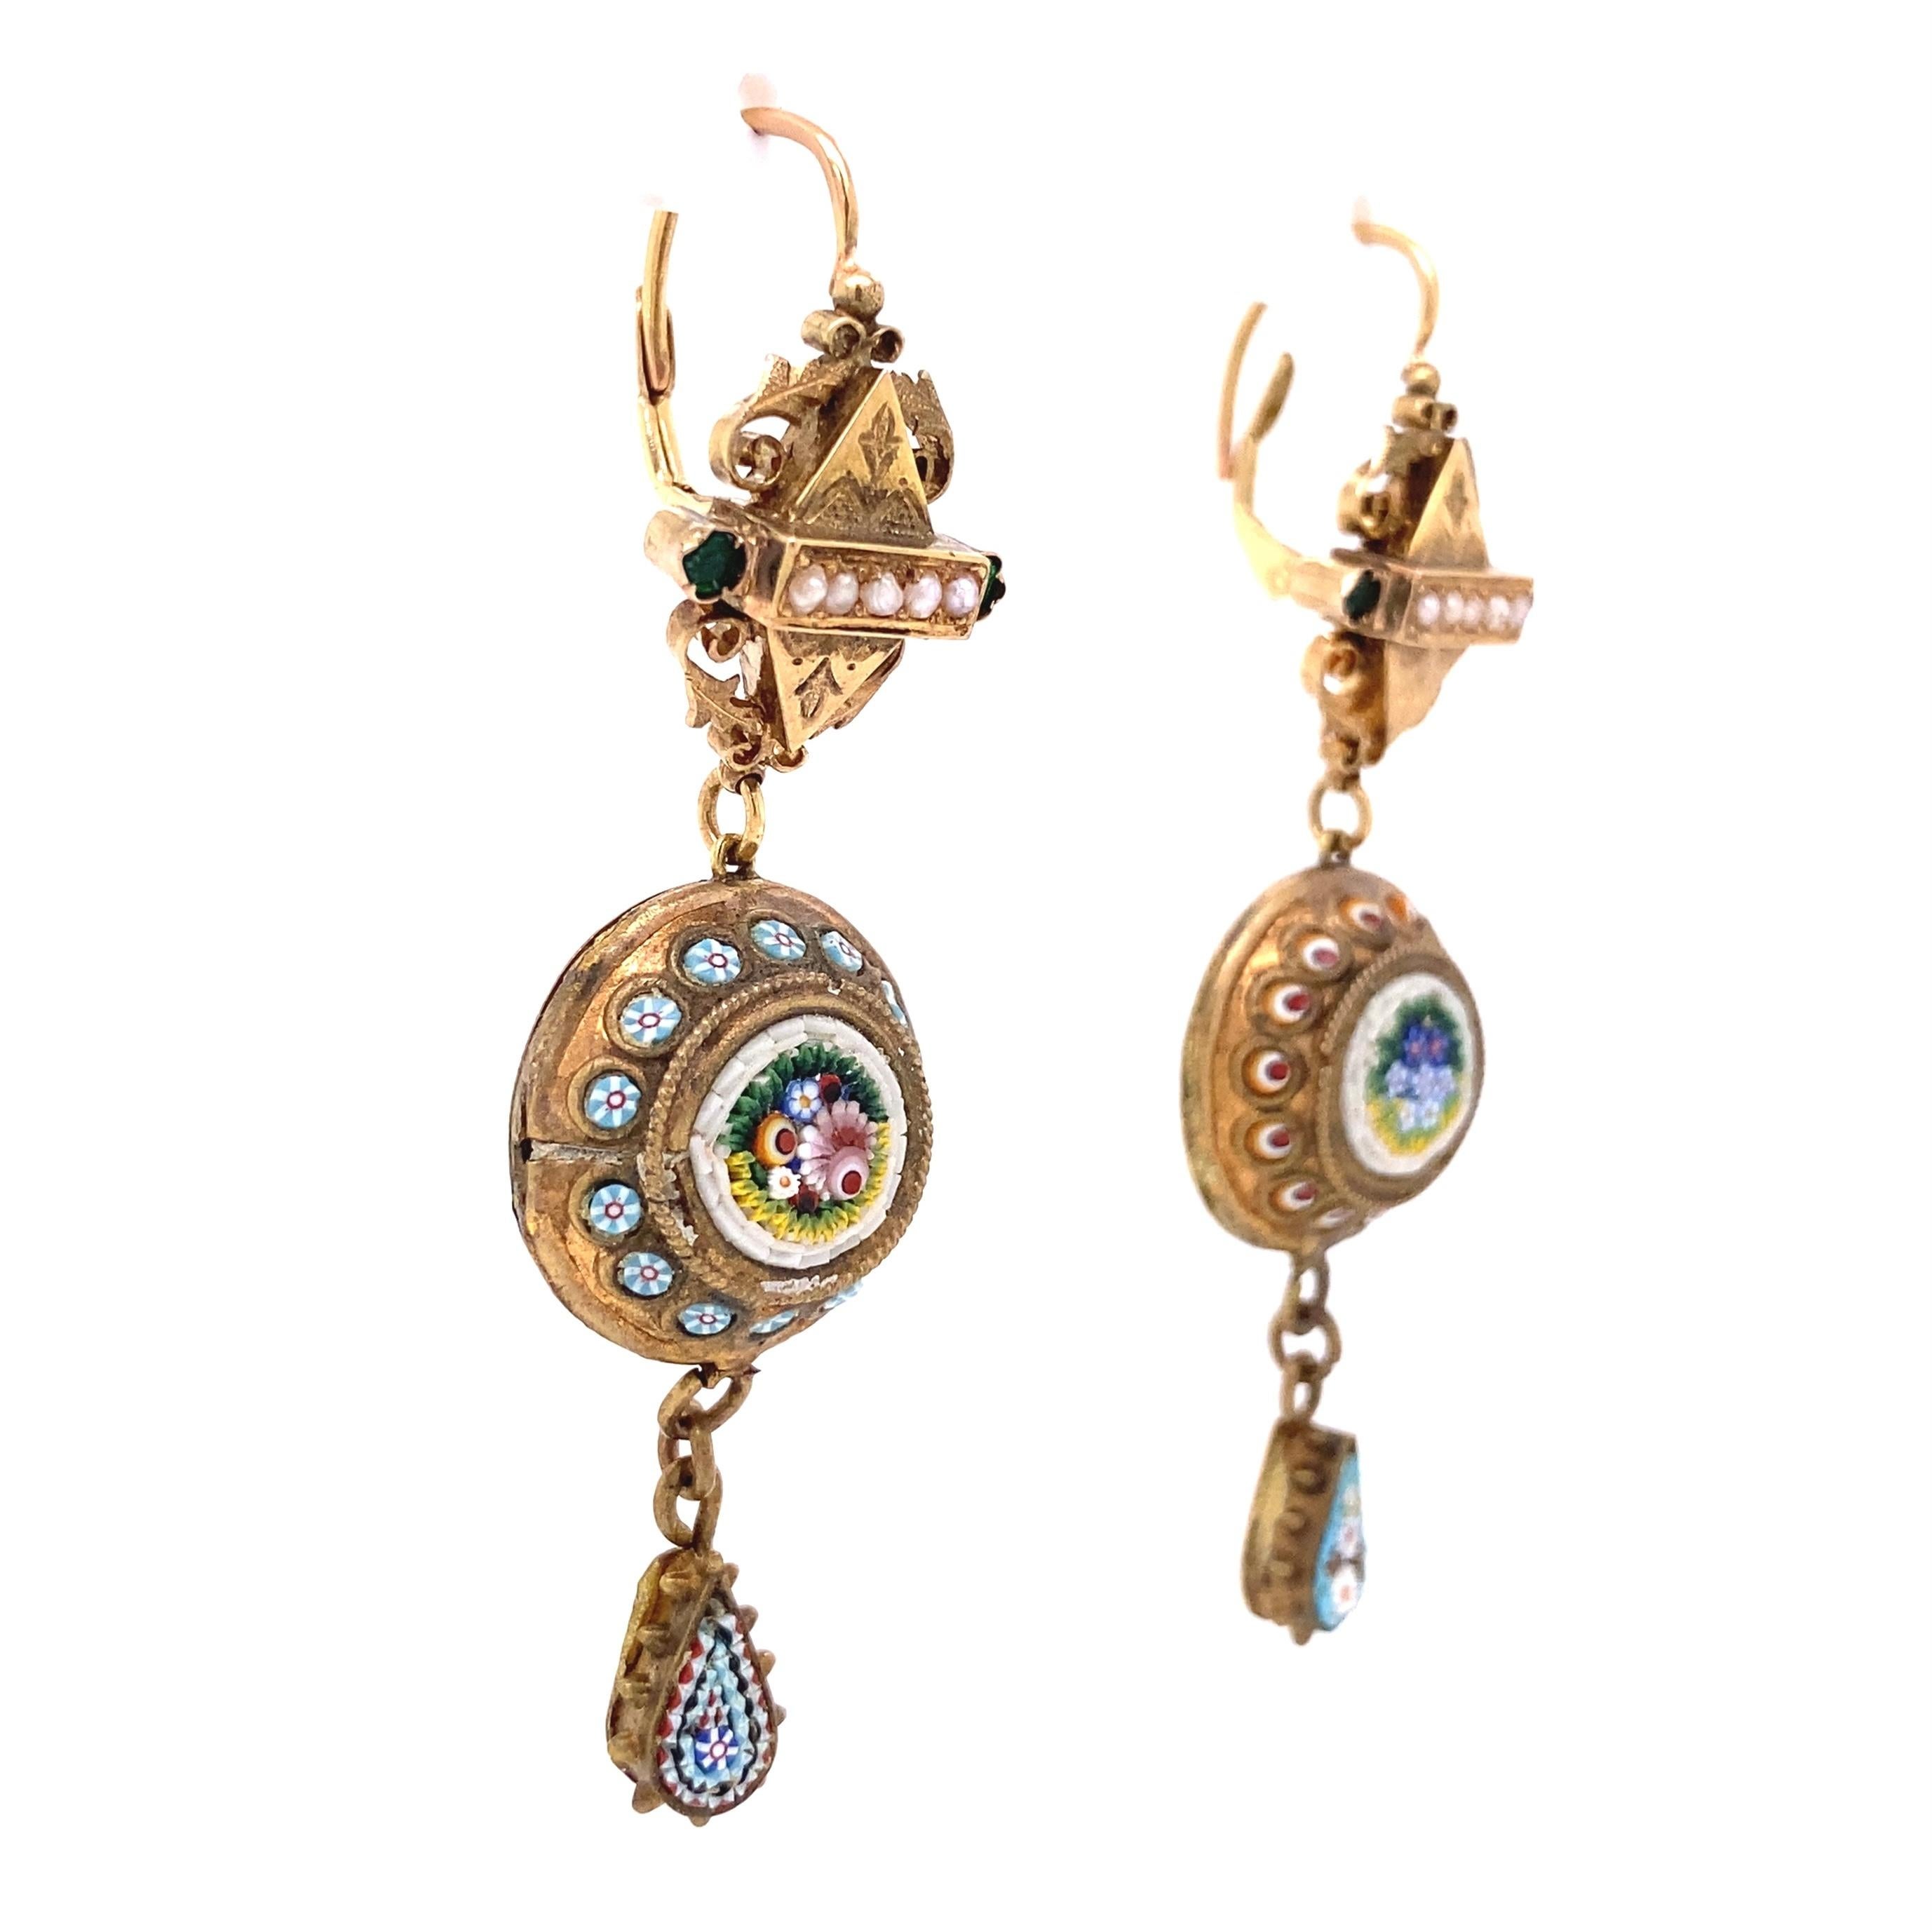 Simply Beautiful Victorian Micro Mosaic Seed Pearl Drop Earrings. Set with 2 Micro Mosaic discs and accented with Seed Pearls and Green Stones. Hand crafted in 14 Karat Yellow Gold Each Earring measures approx. 2.55” l x 0.73” w. Circa 1850s.